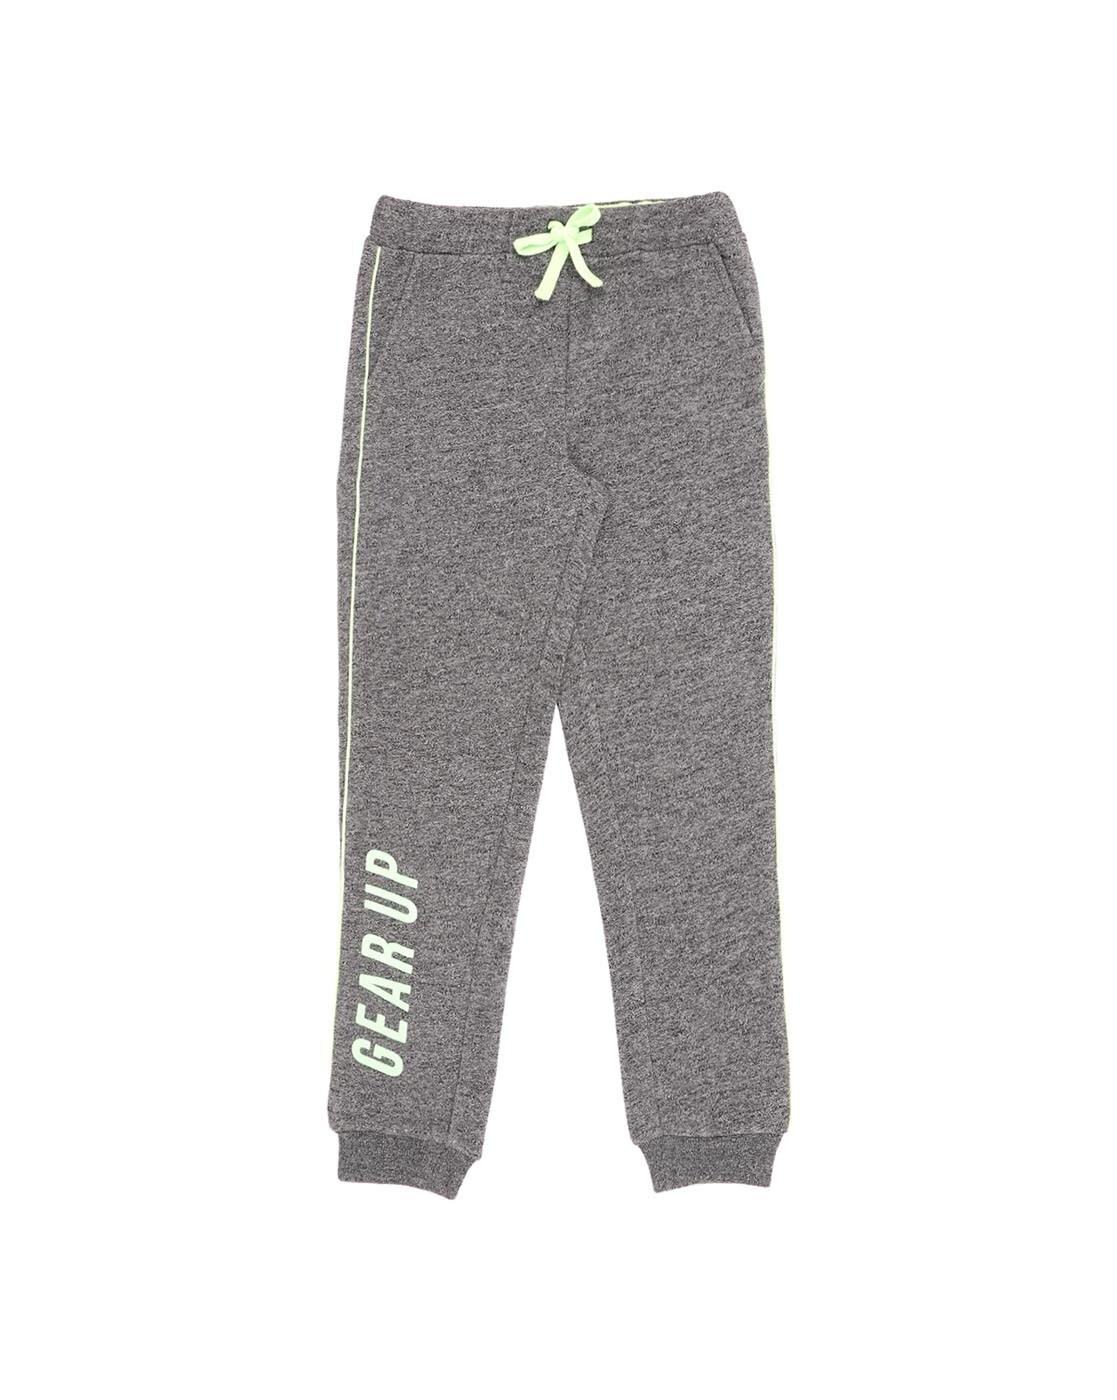 Buy Grey Track Pants for Boys by Pantaloons Junior Online